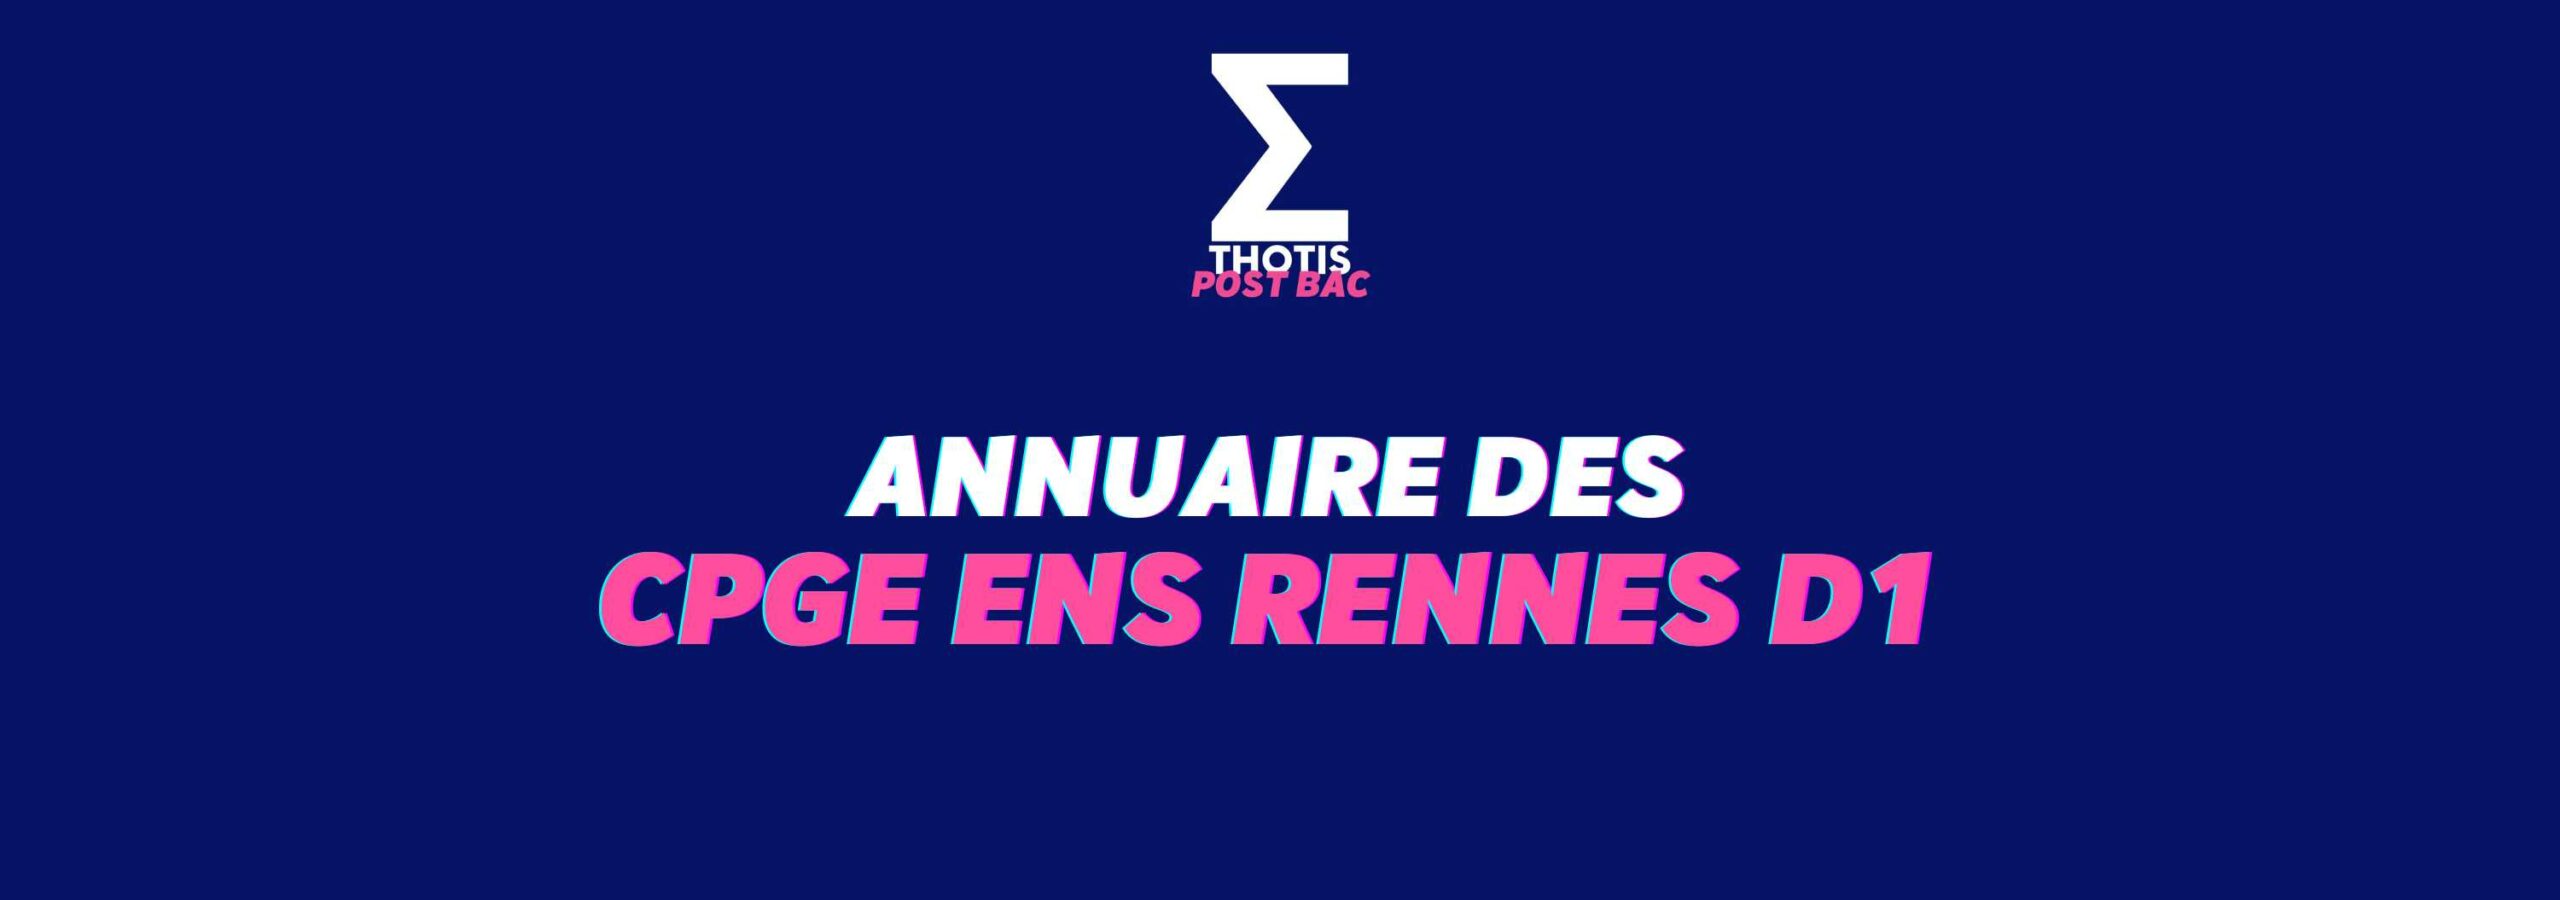 Annuaire cpge ENS Rennes D1